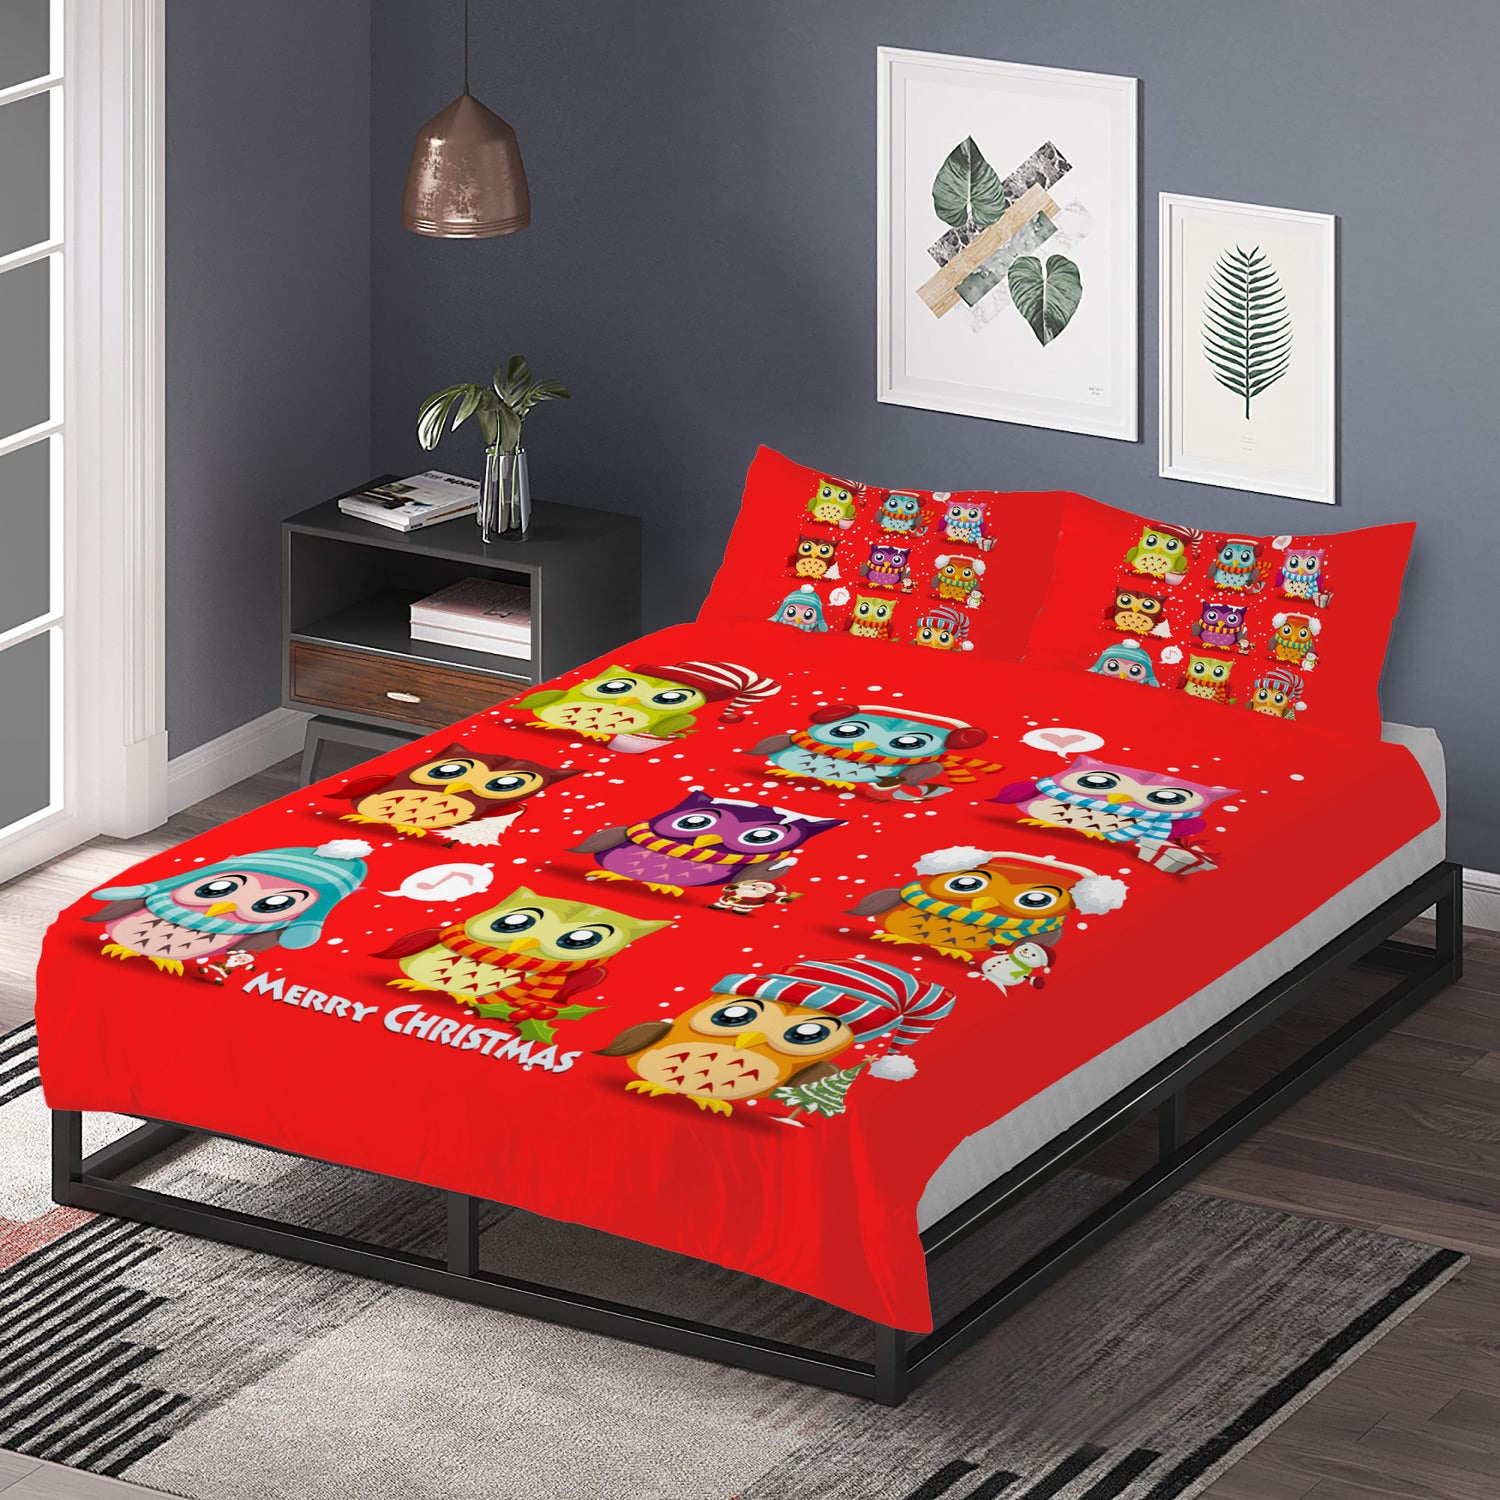 Red Bedding Christmas Owls Home-clothes-jewelry